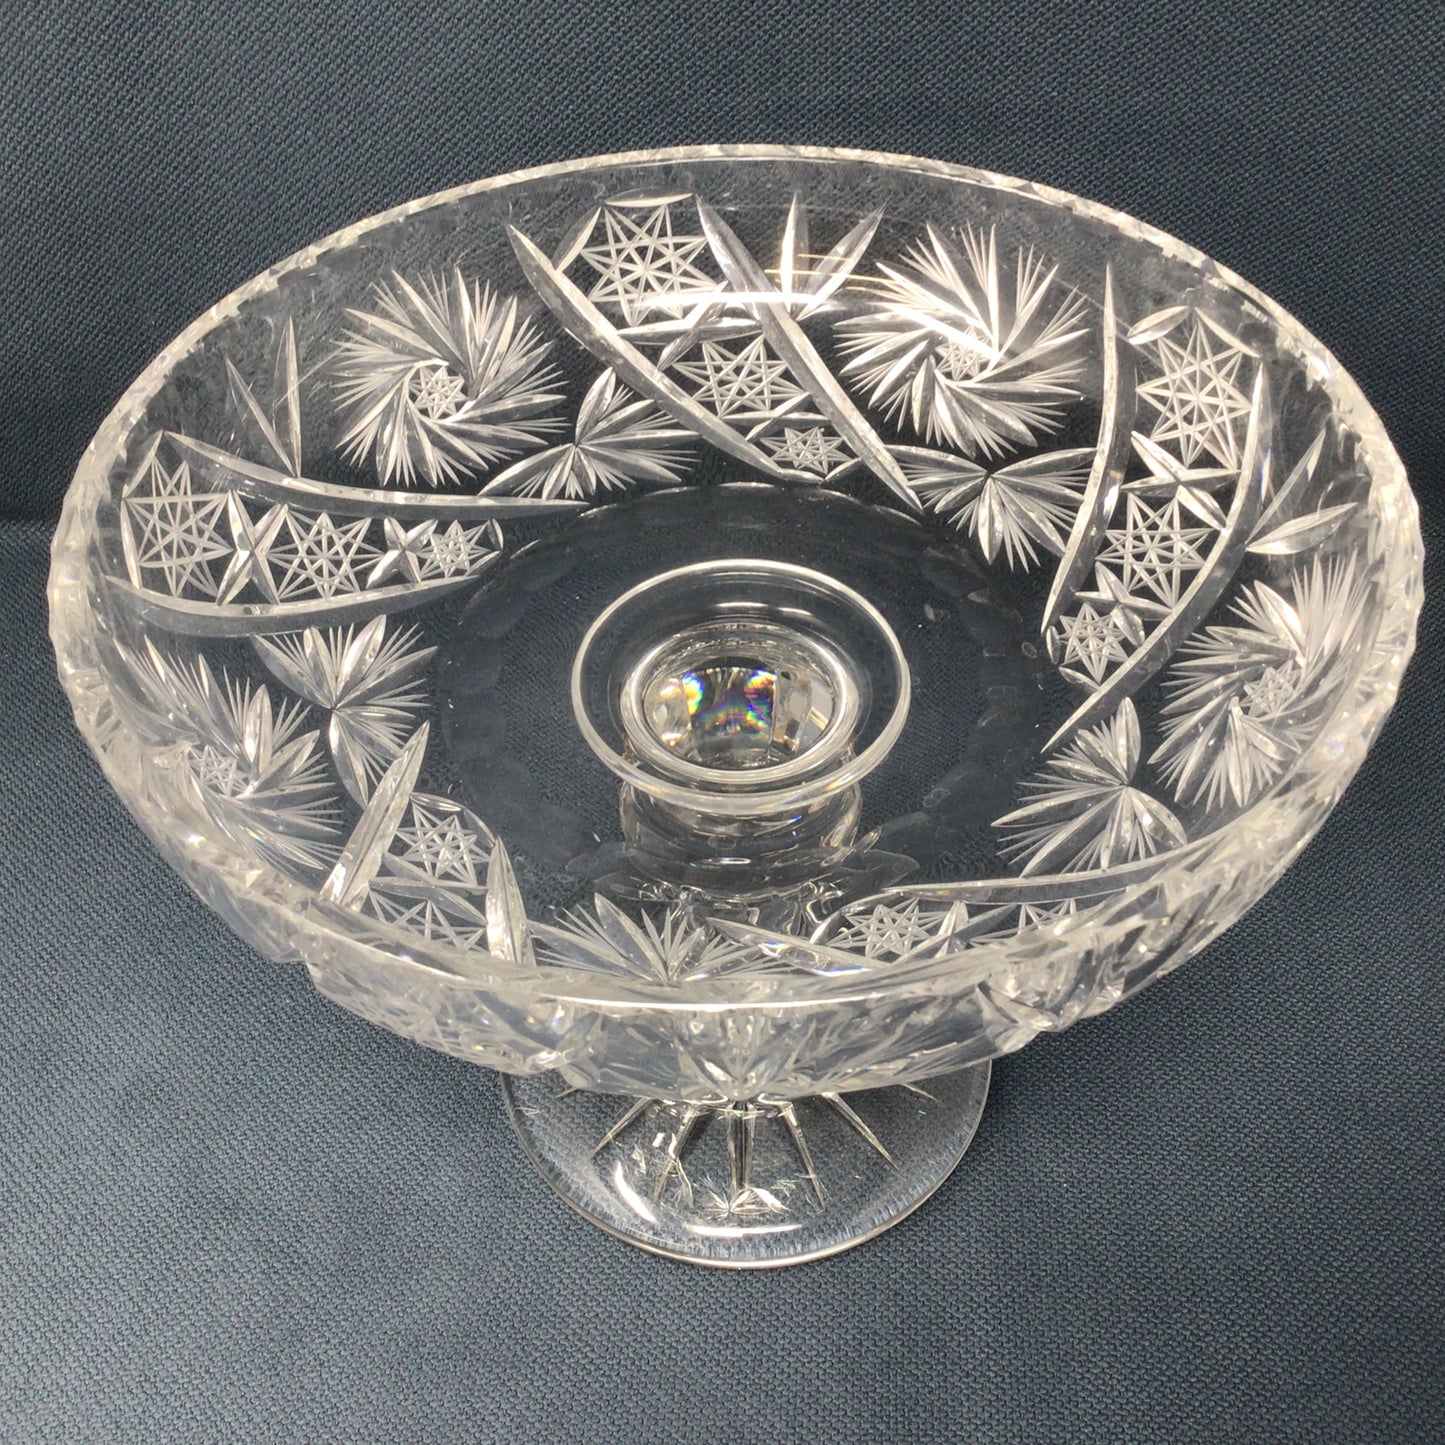 Large Cut Crystal Compote Bowl